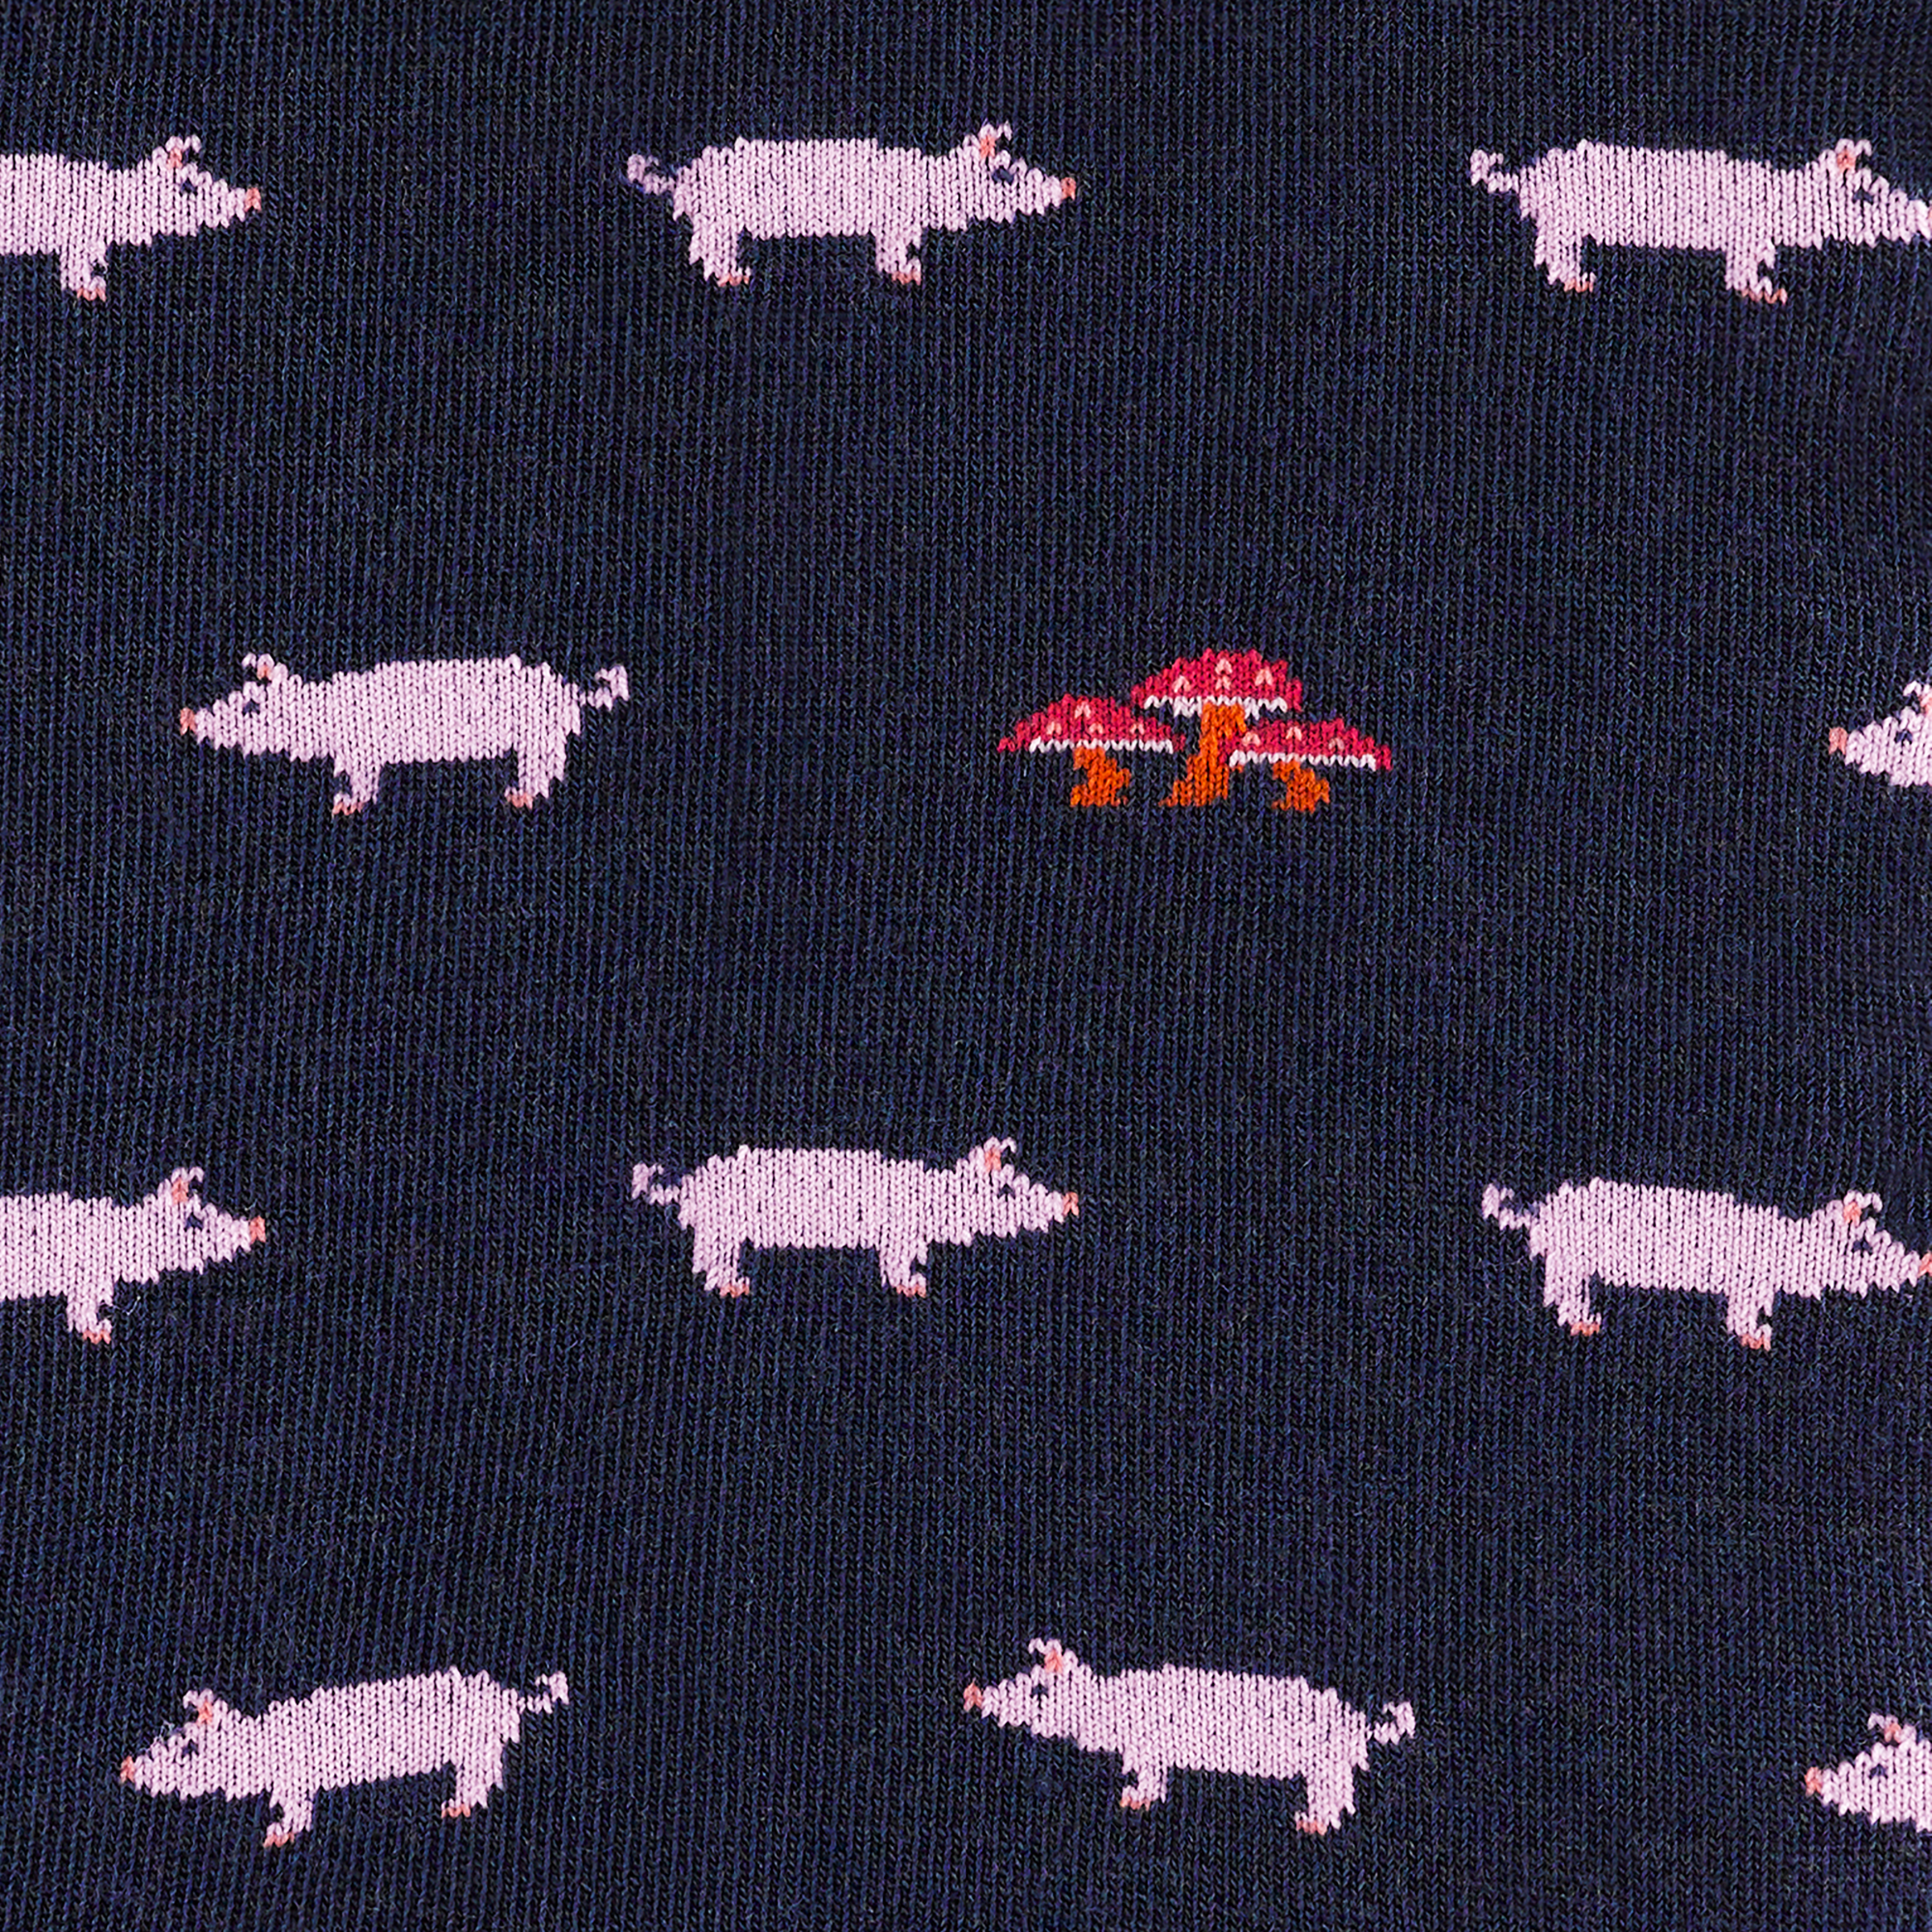 Detail shot of men's truffle hog crew lifestyle sock in navy with pink pig and red fungi details